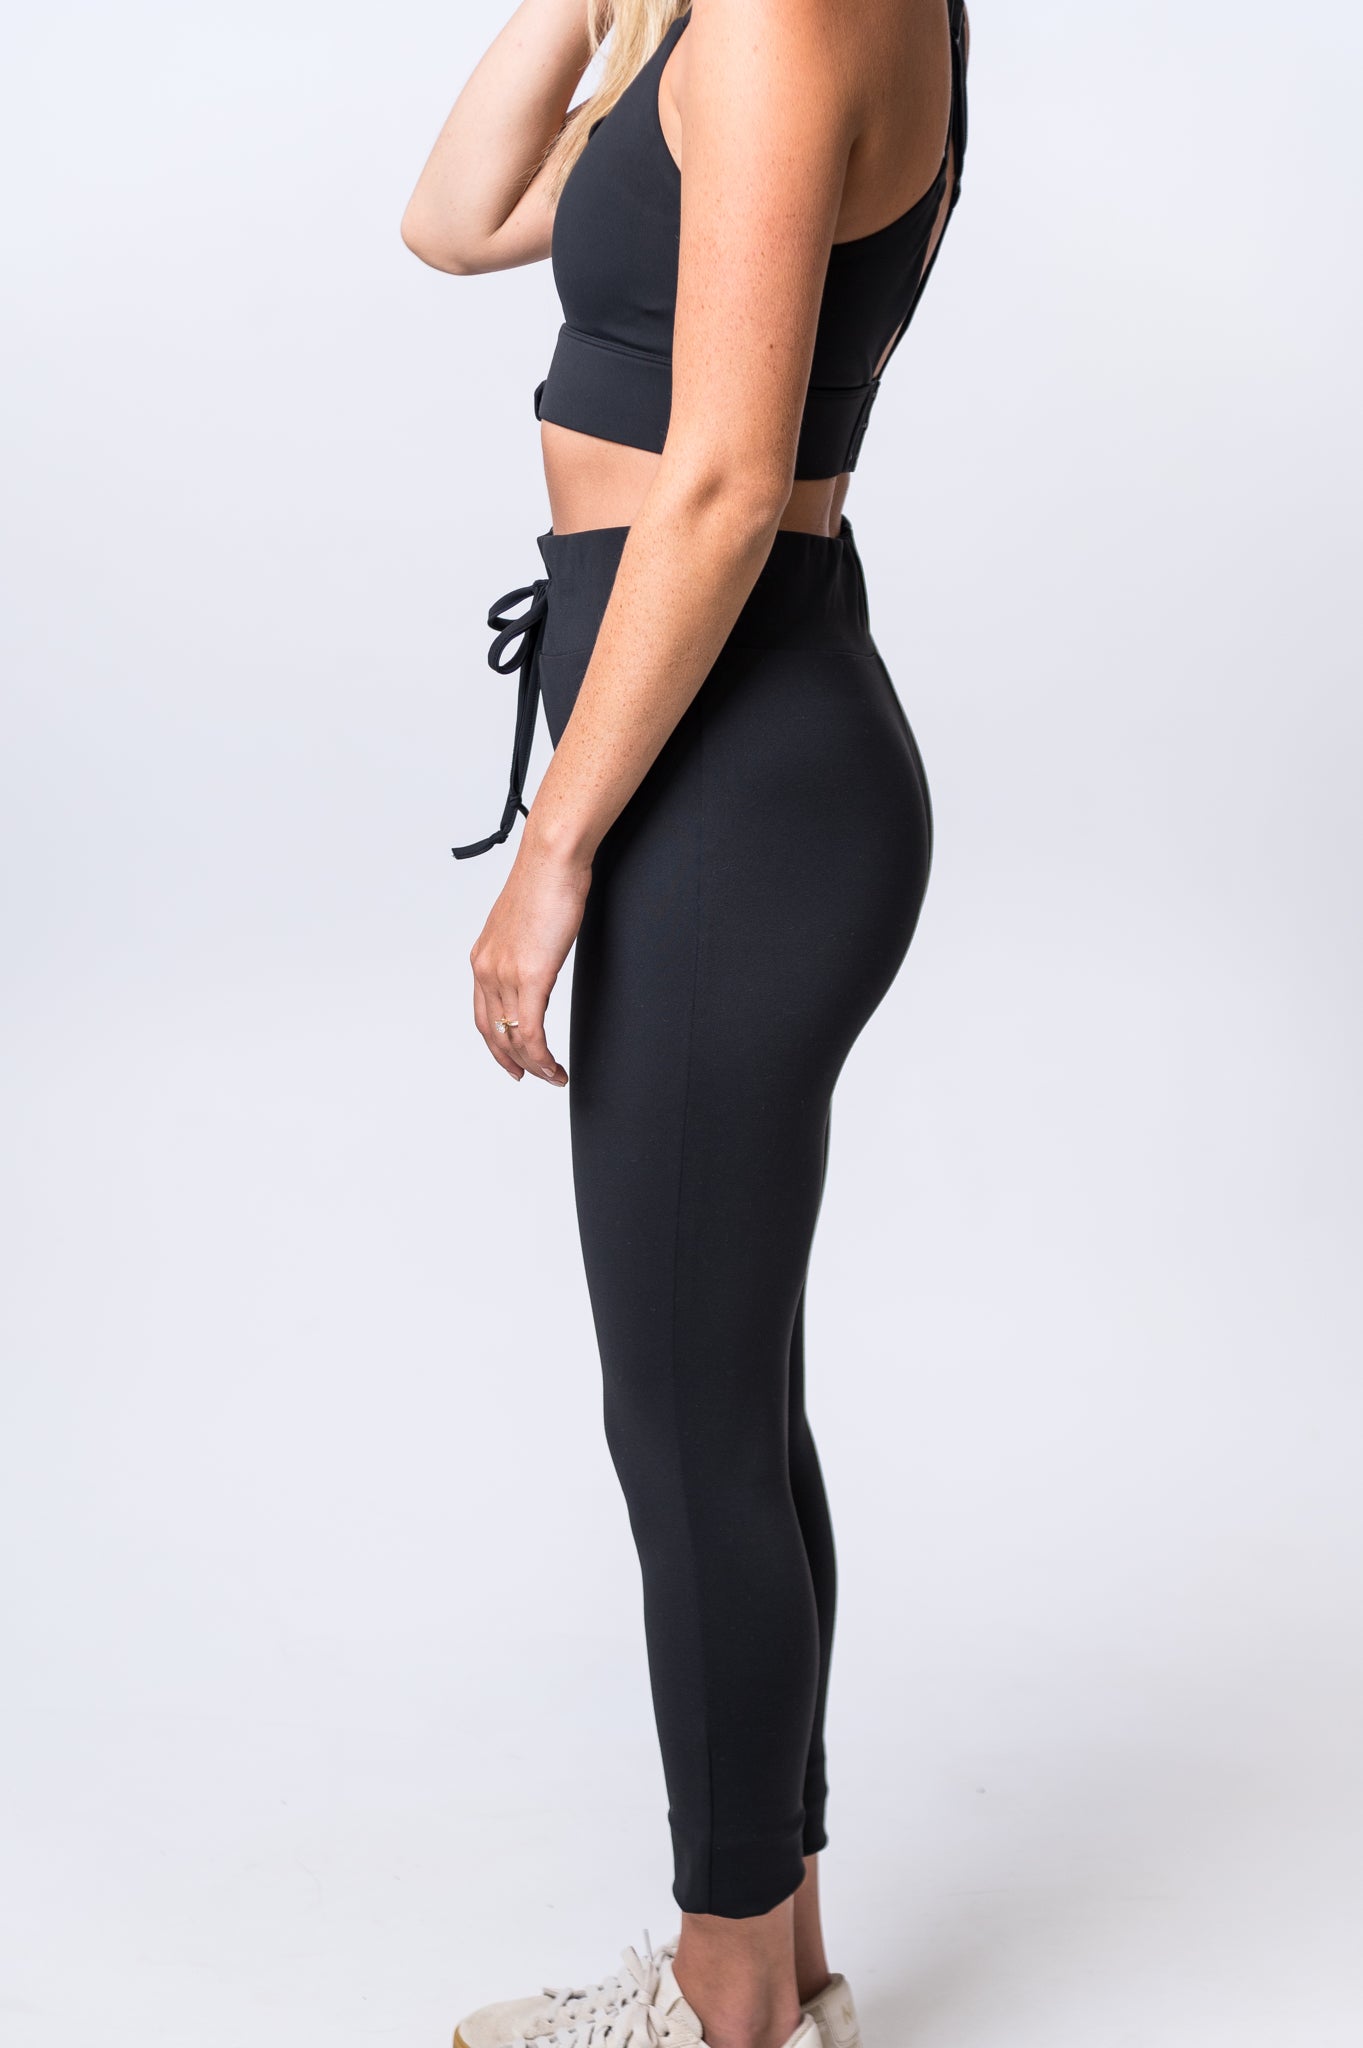 Woman wearing black, ankle length drawstring leggings with matching sports bra and white sneakers. Side of clothing is being shown